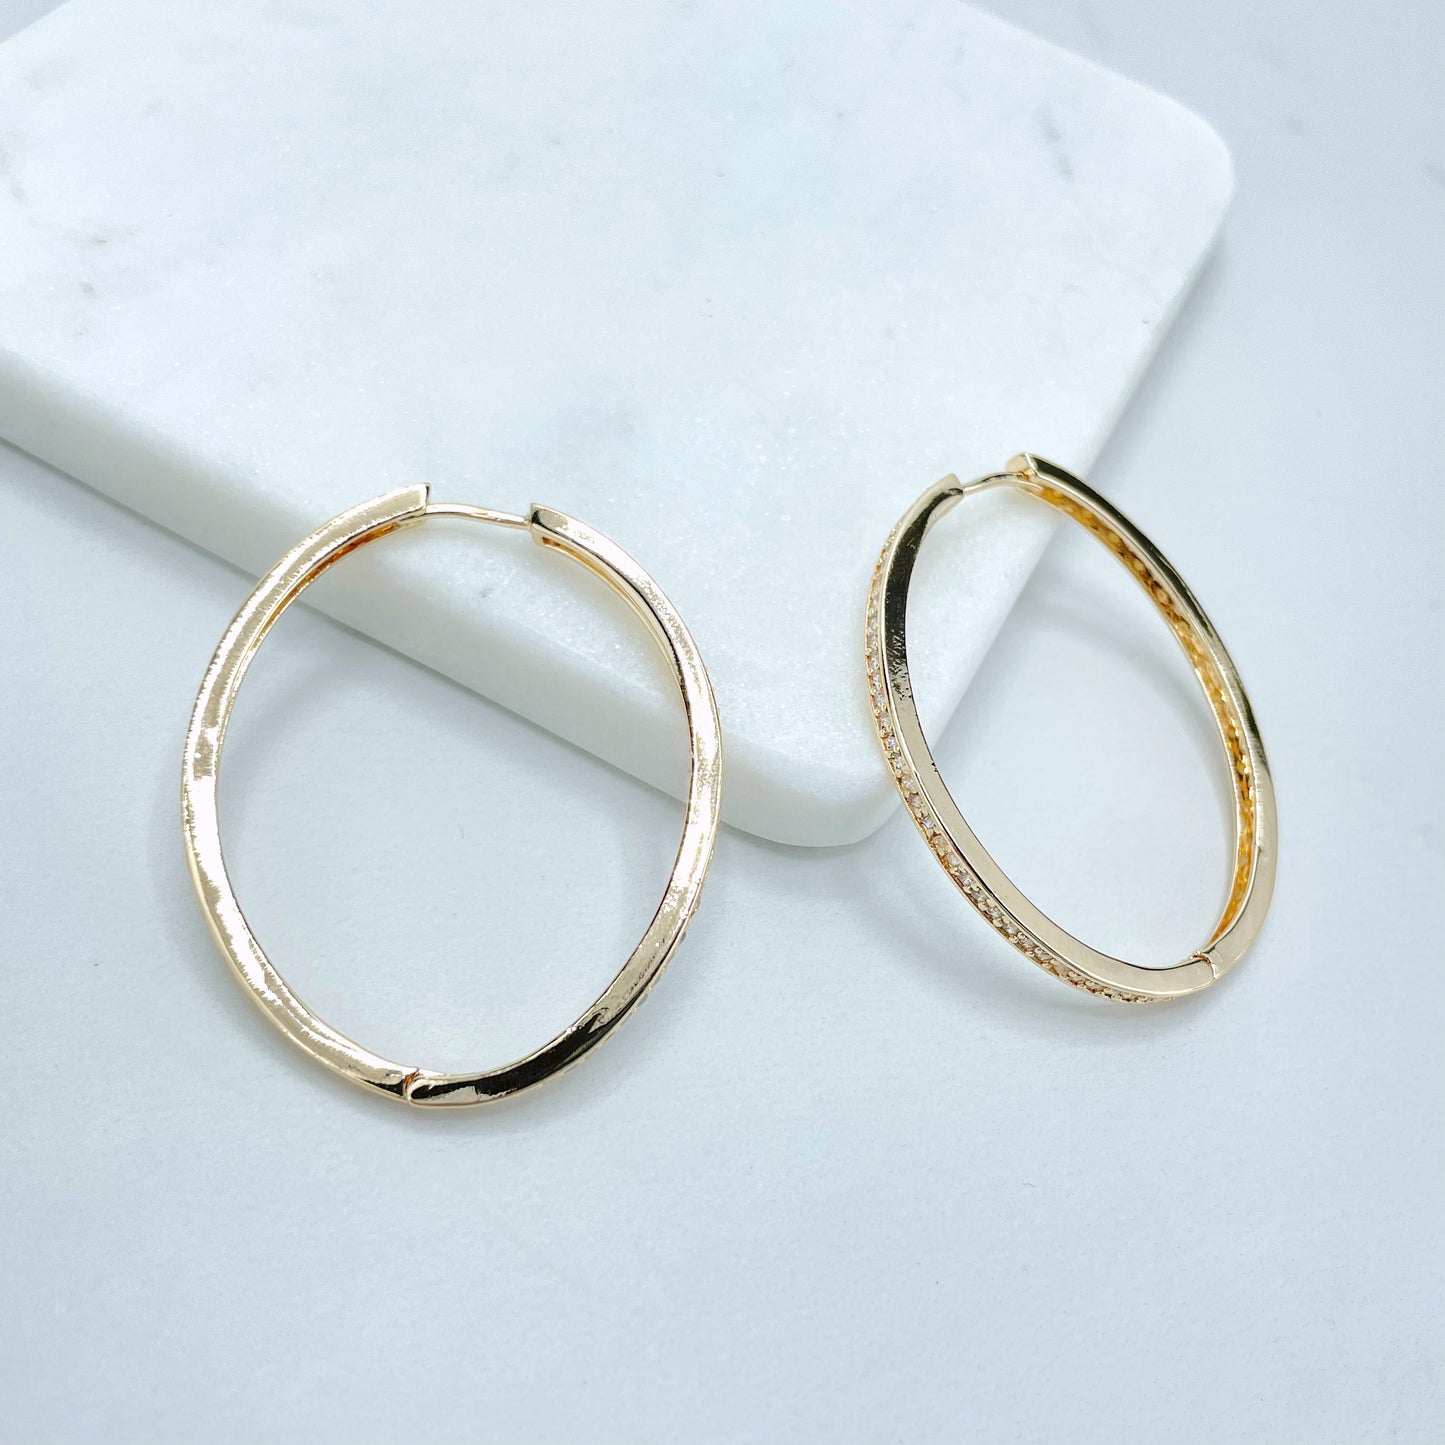 18k Gold Filled 37mm Hoop Earrings with Micro Pave, Cubic Zirconia, Dainty Hoops, Zircon Hoops, Wholesale Jewelry Making Supplies